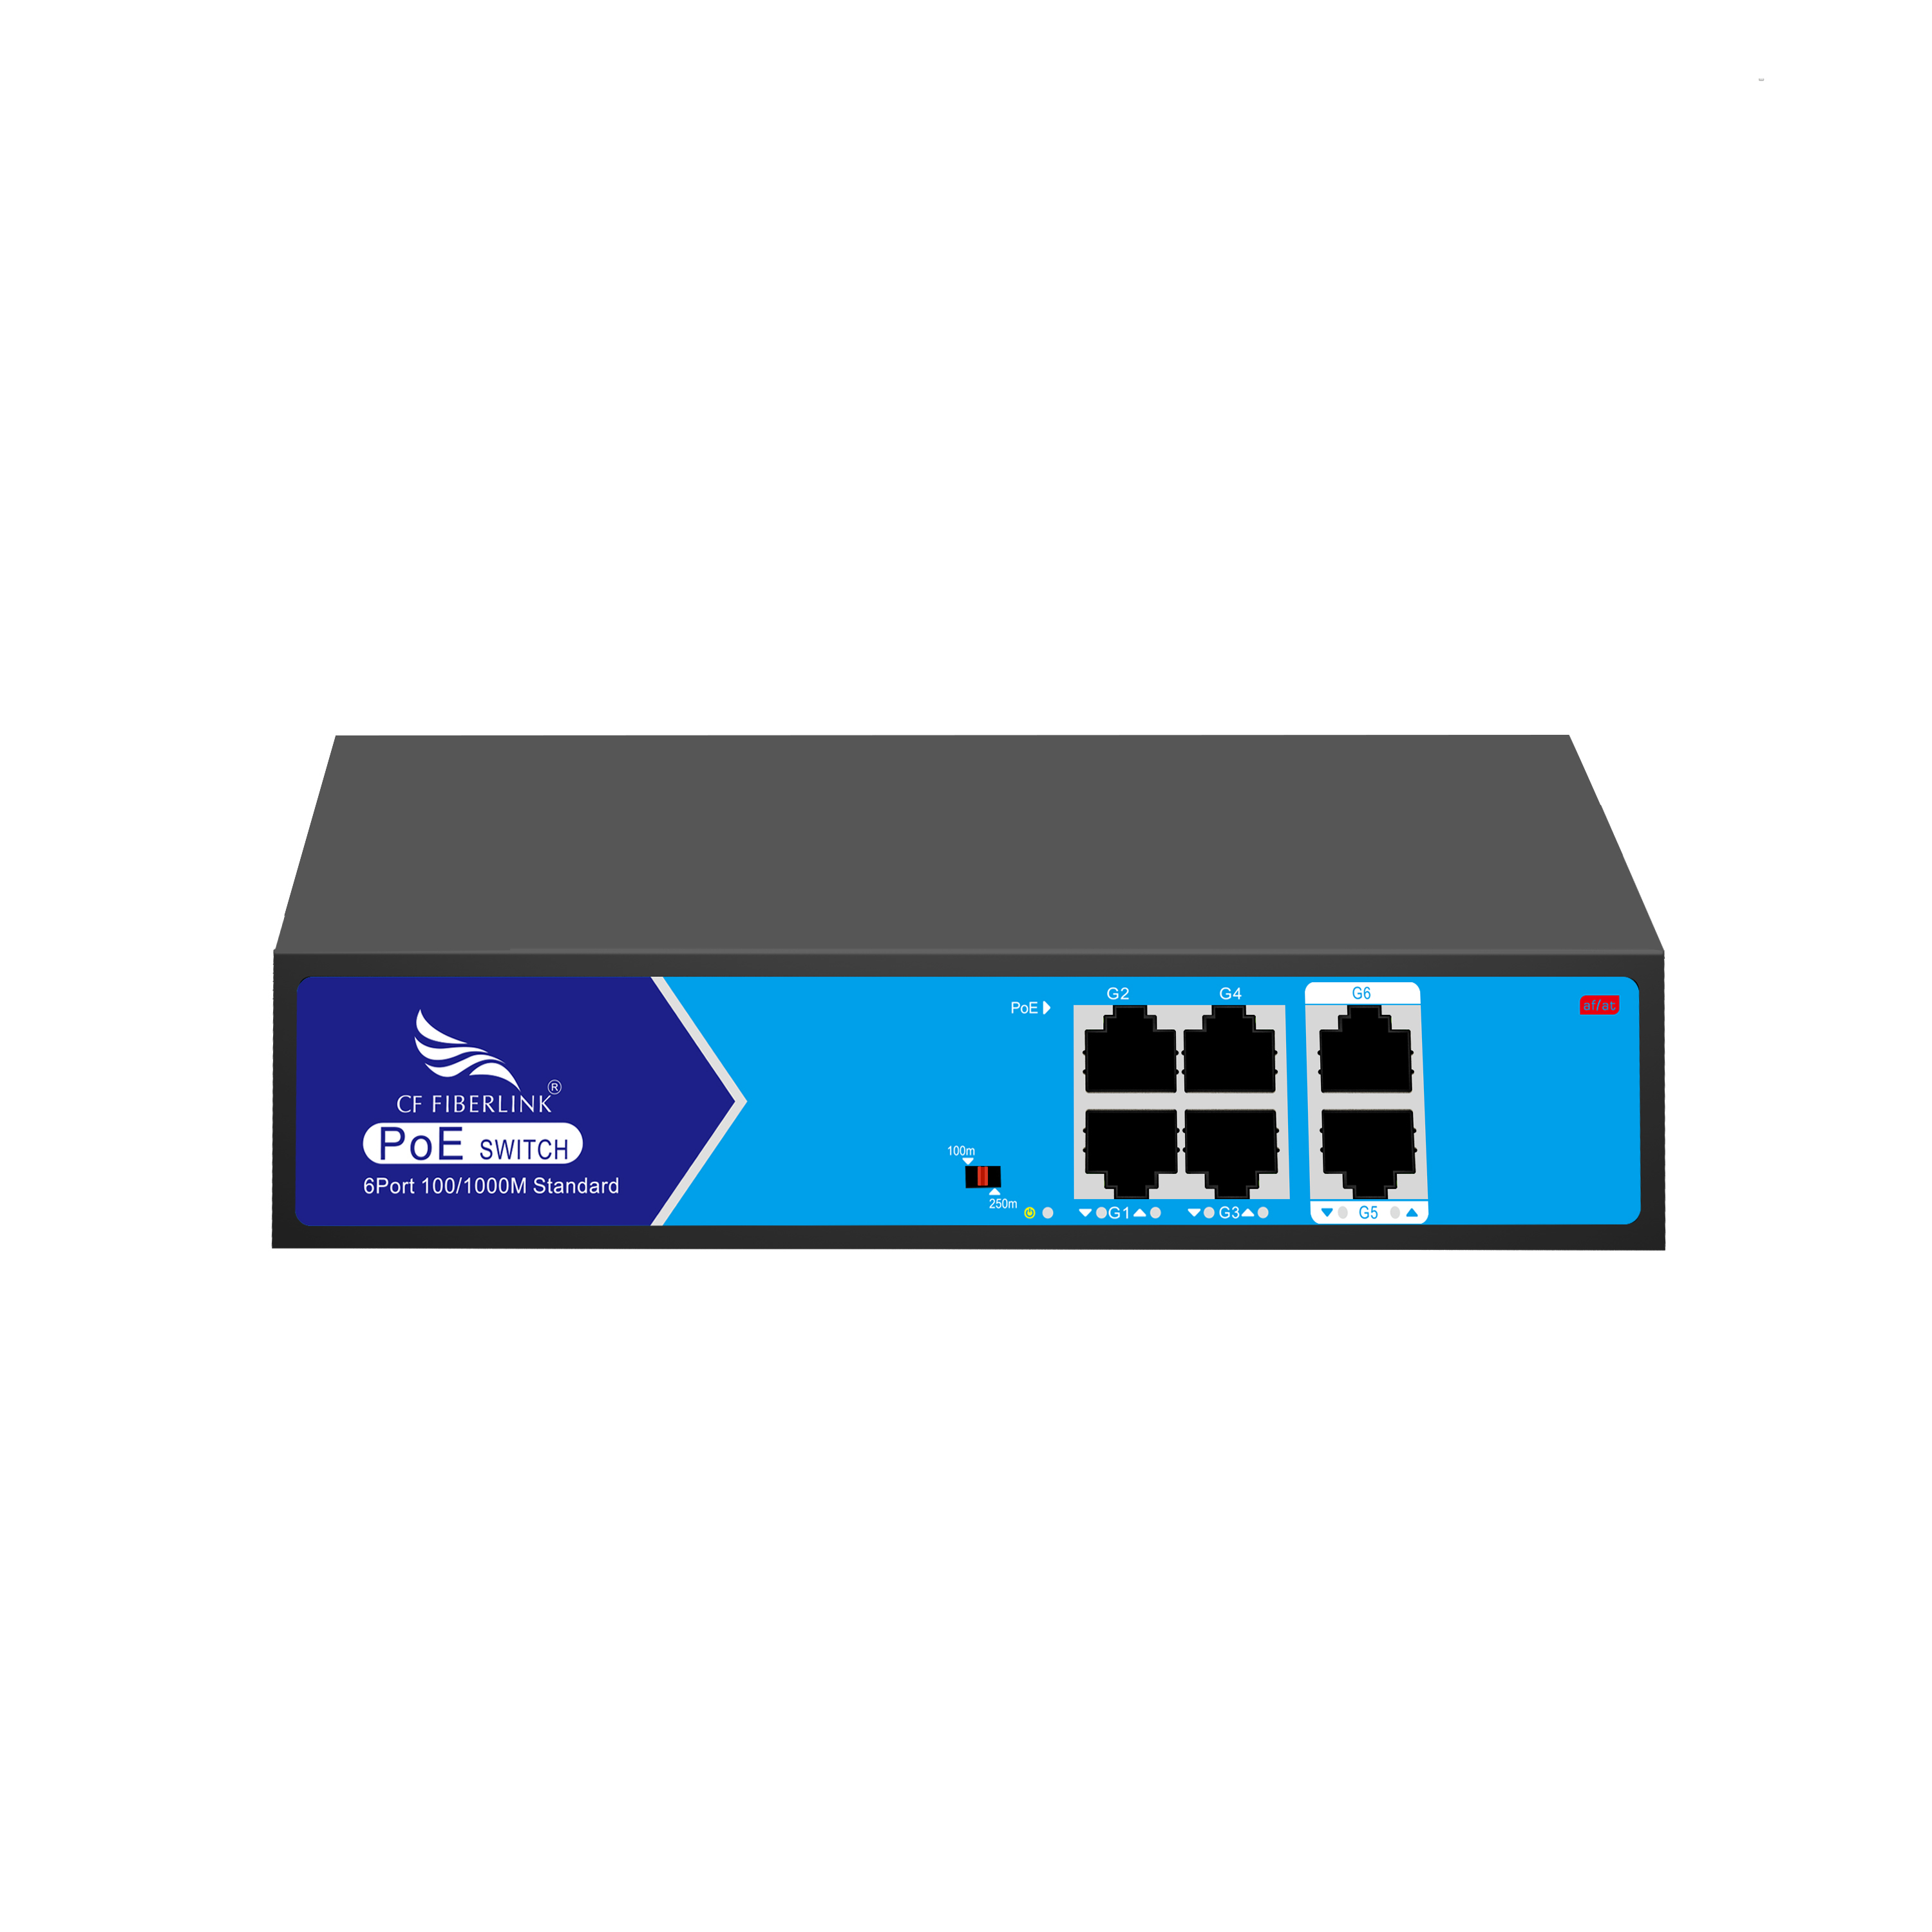 6-port 10/100/1000M Ethernet Switch Featured Image